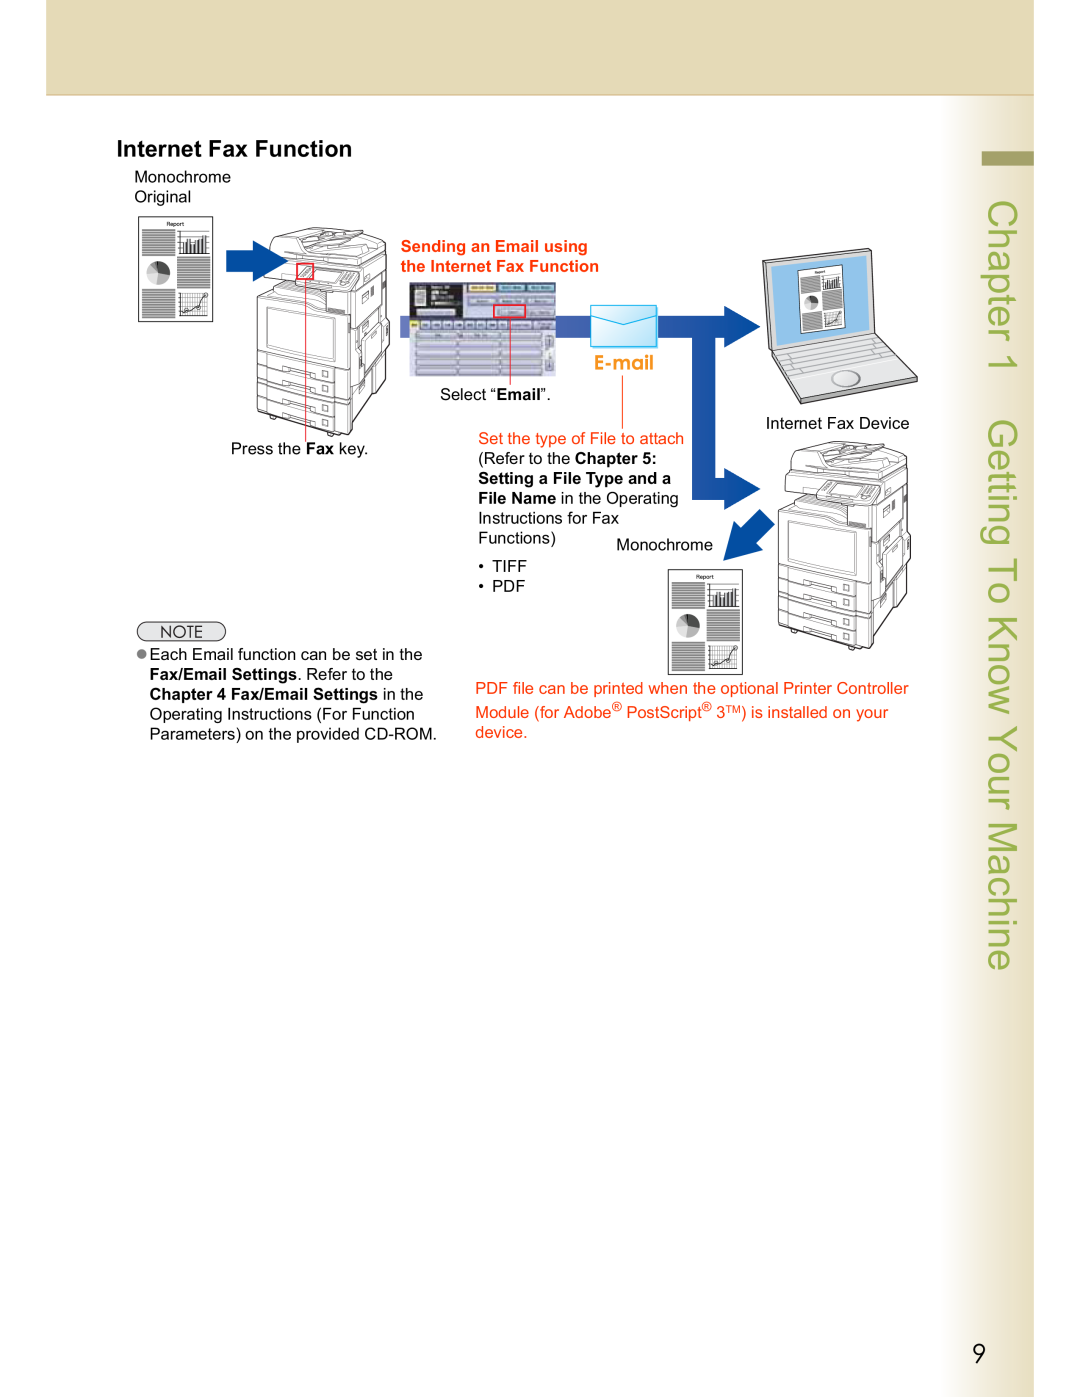 Panasonic DP-C213, DP-C354 manual Getting To Know Your Machine, Sending an Email using the Internet Fax Function, device 